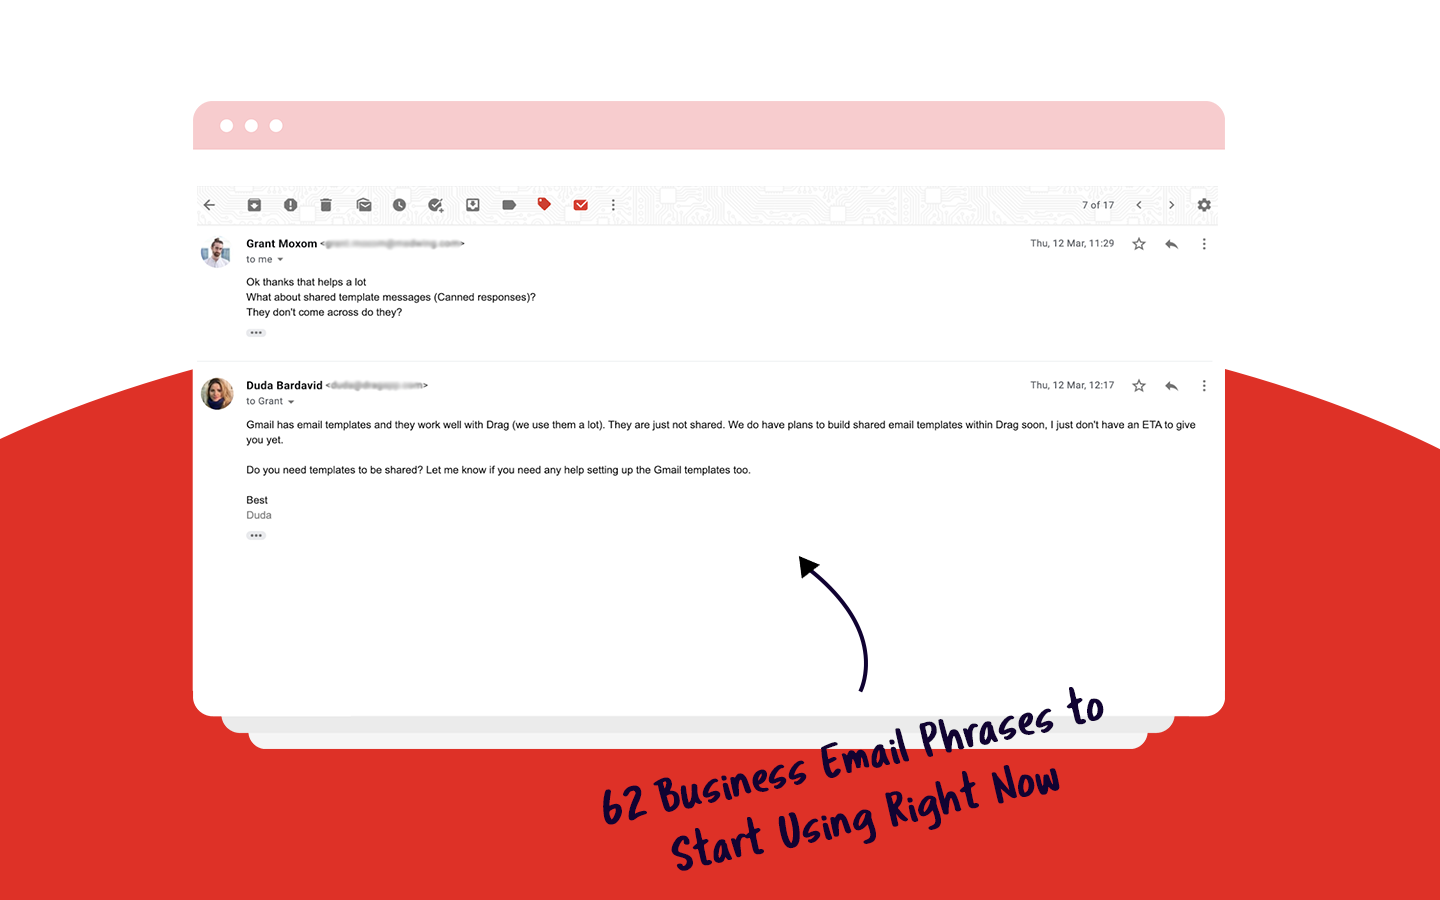 62 Business Email Phrases to Start Using Right Now | DragApp.com